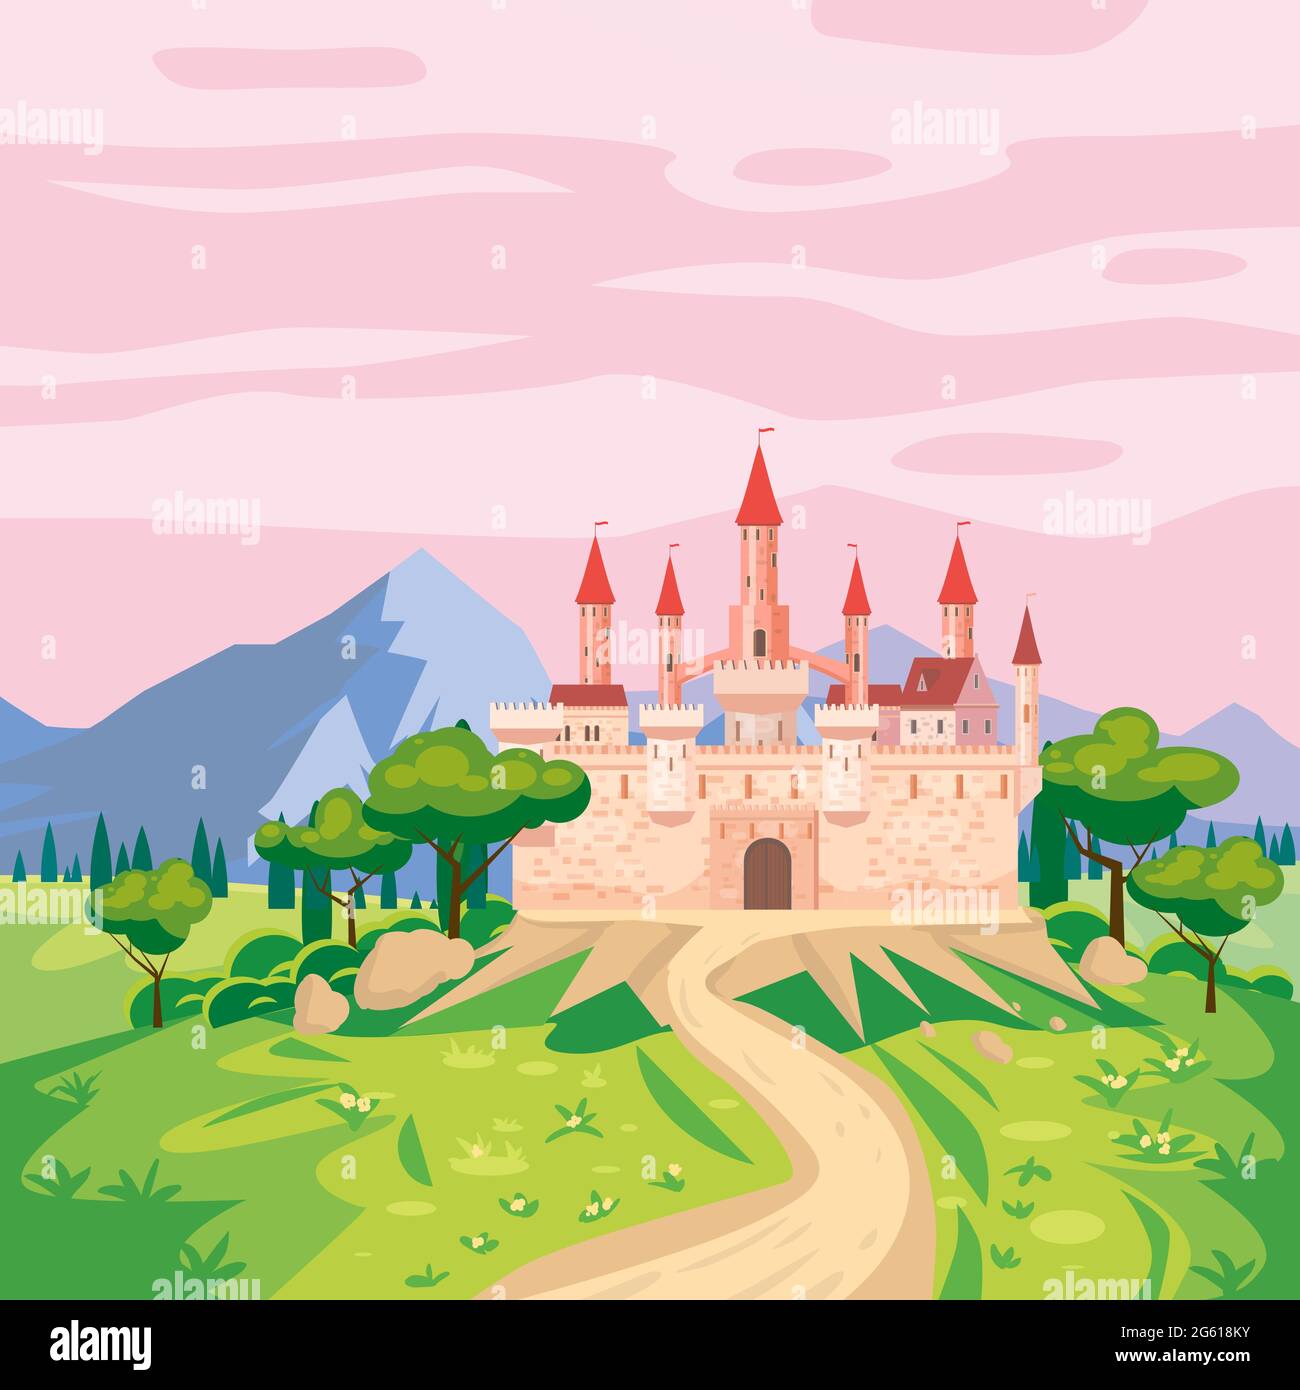 Fantasy landscape with Castle medieval Kingdom rural countryside. Fairytale background mountaines, trees, flora, field road to palace. Vector Stock Vector